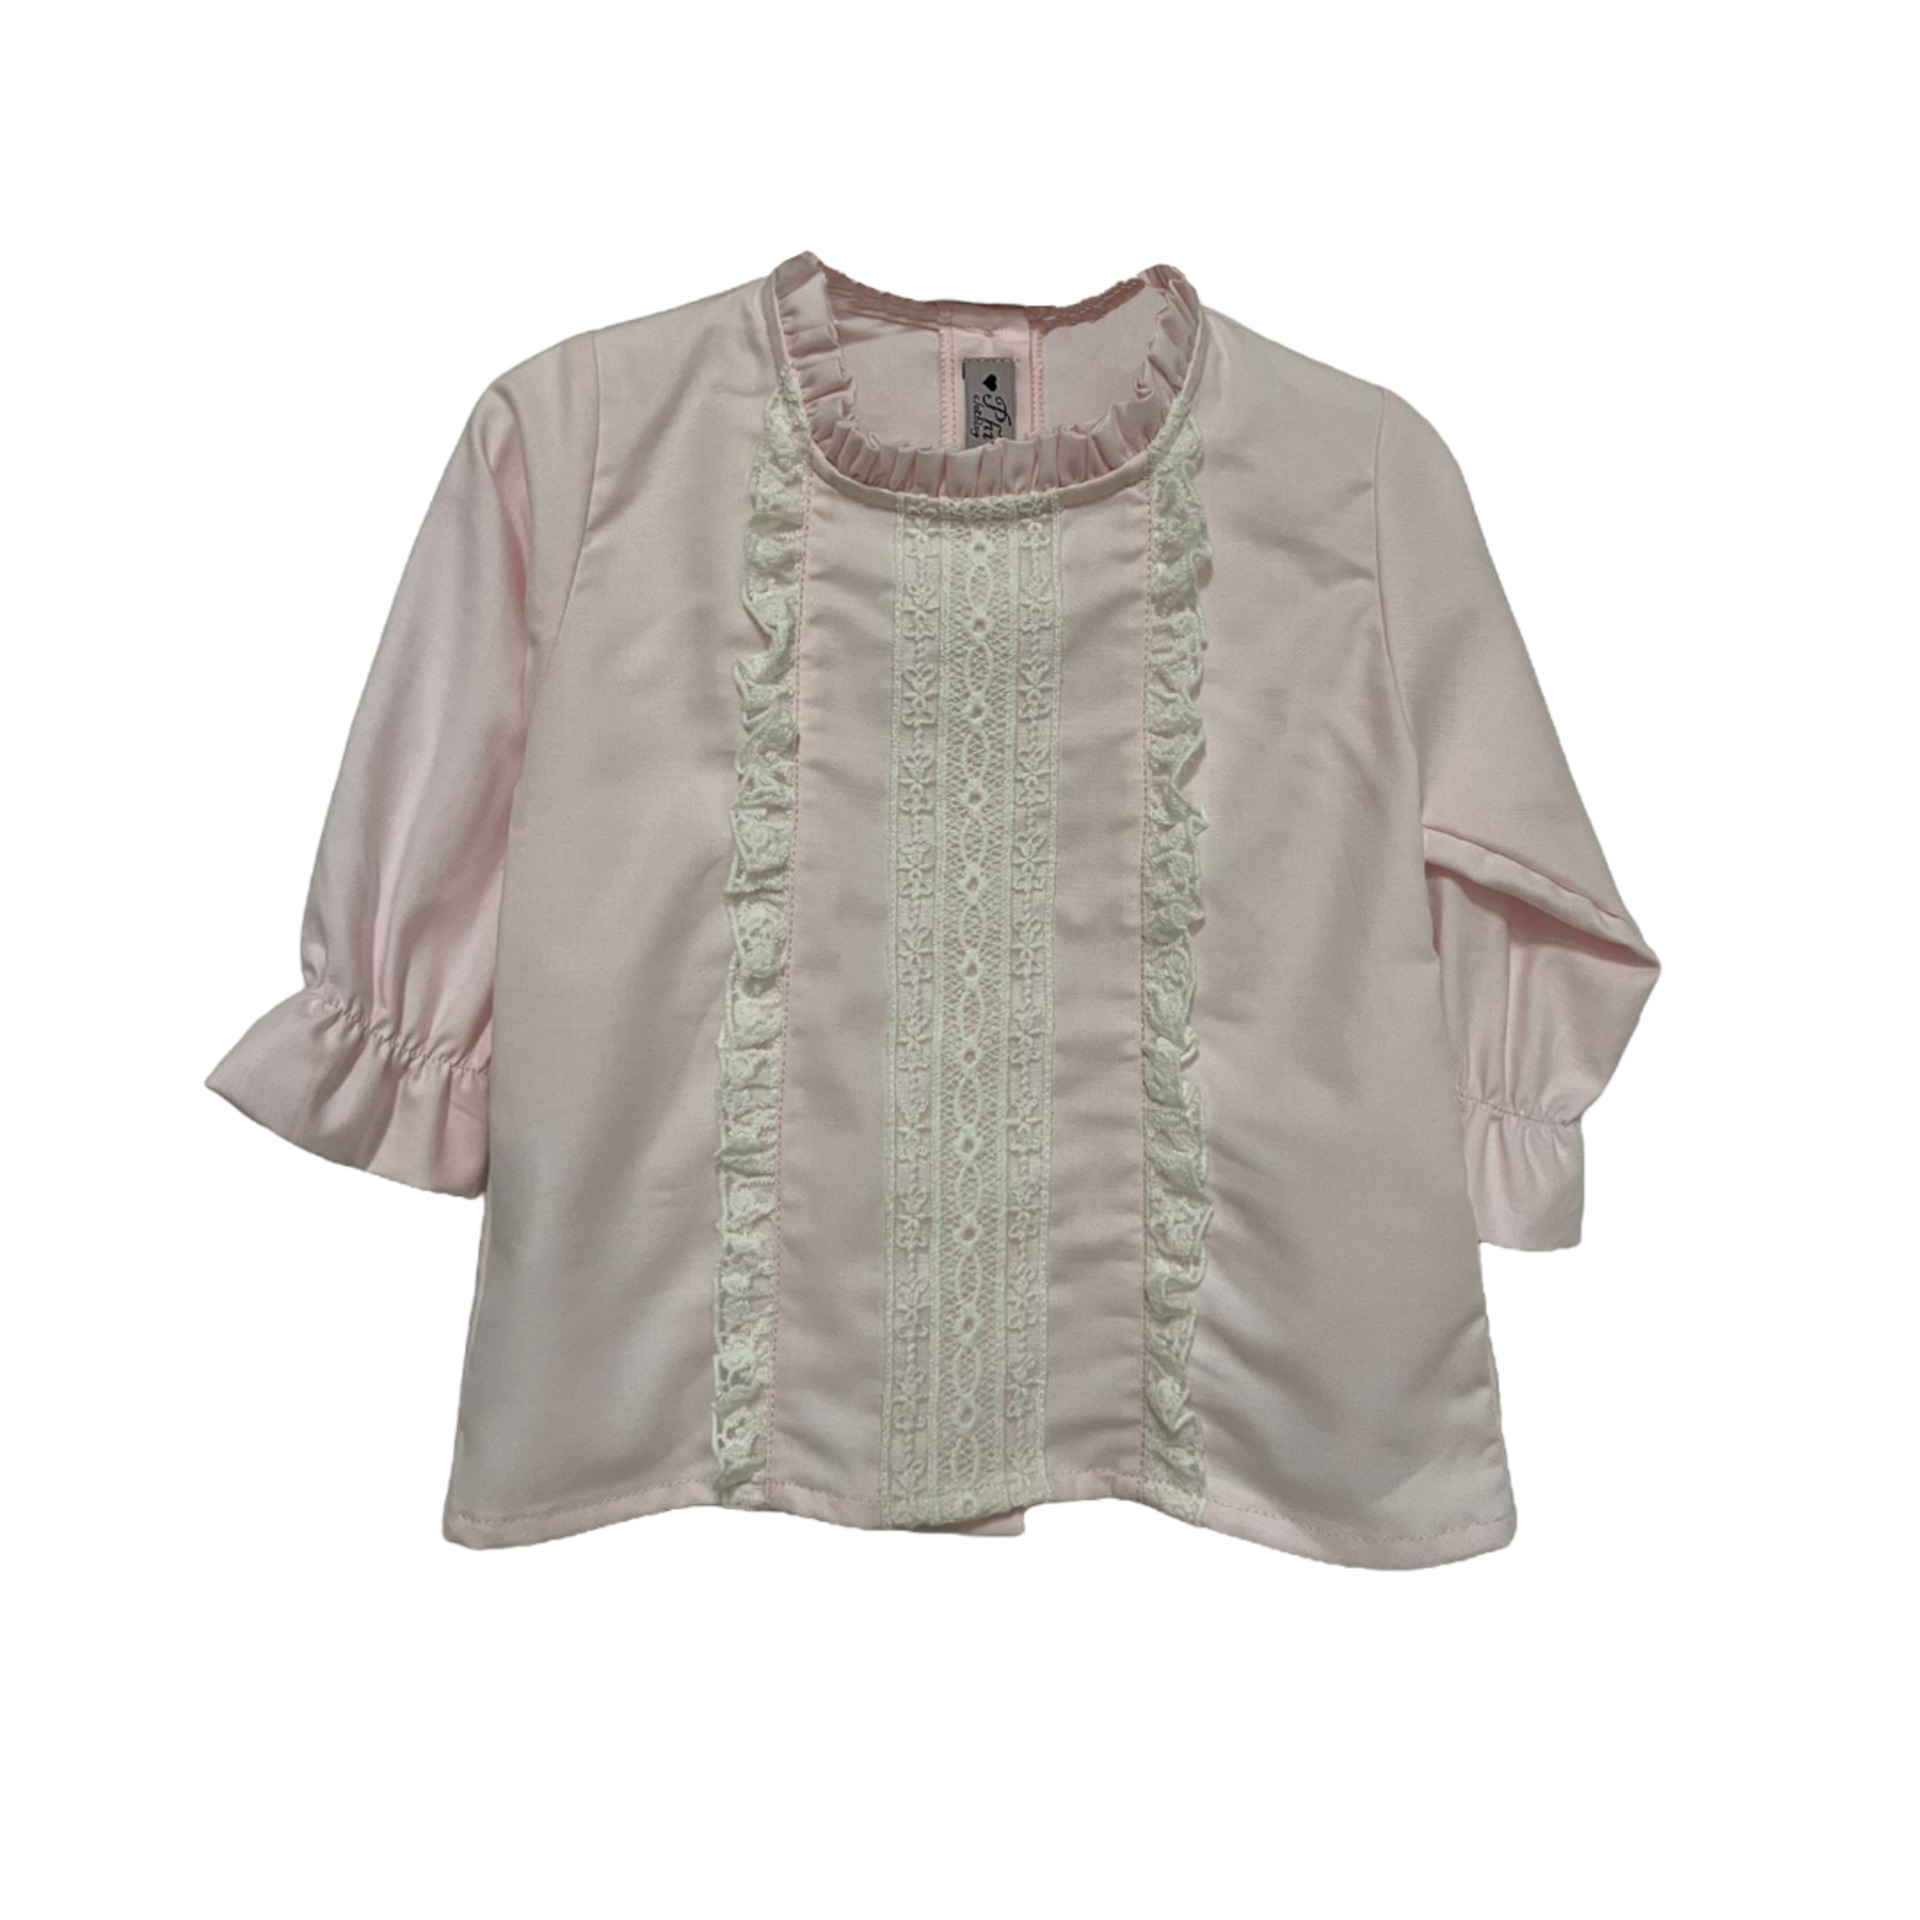 Pink blouse with lace details